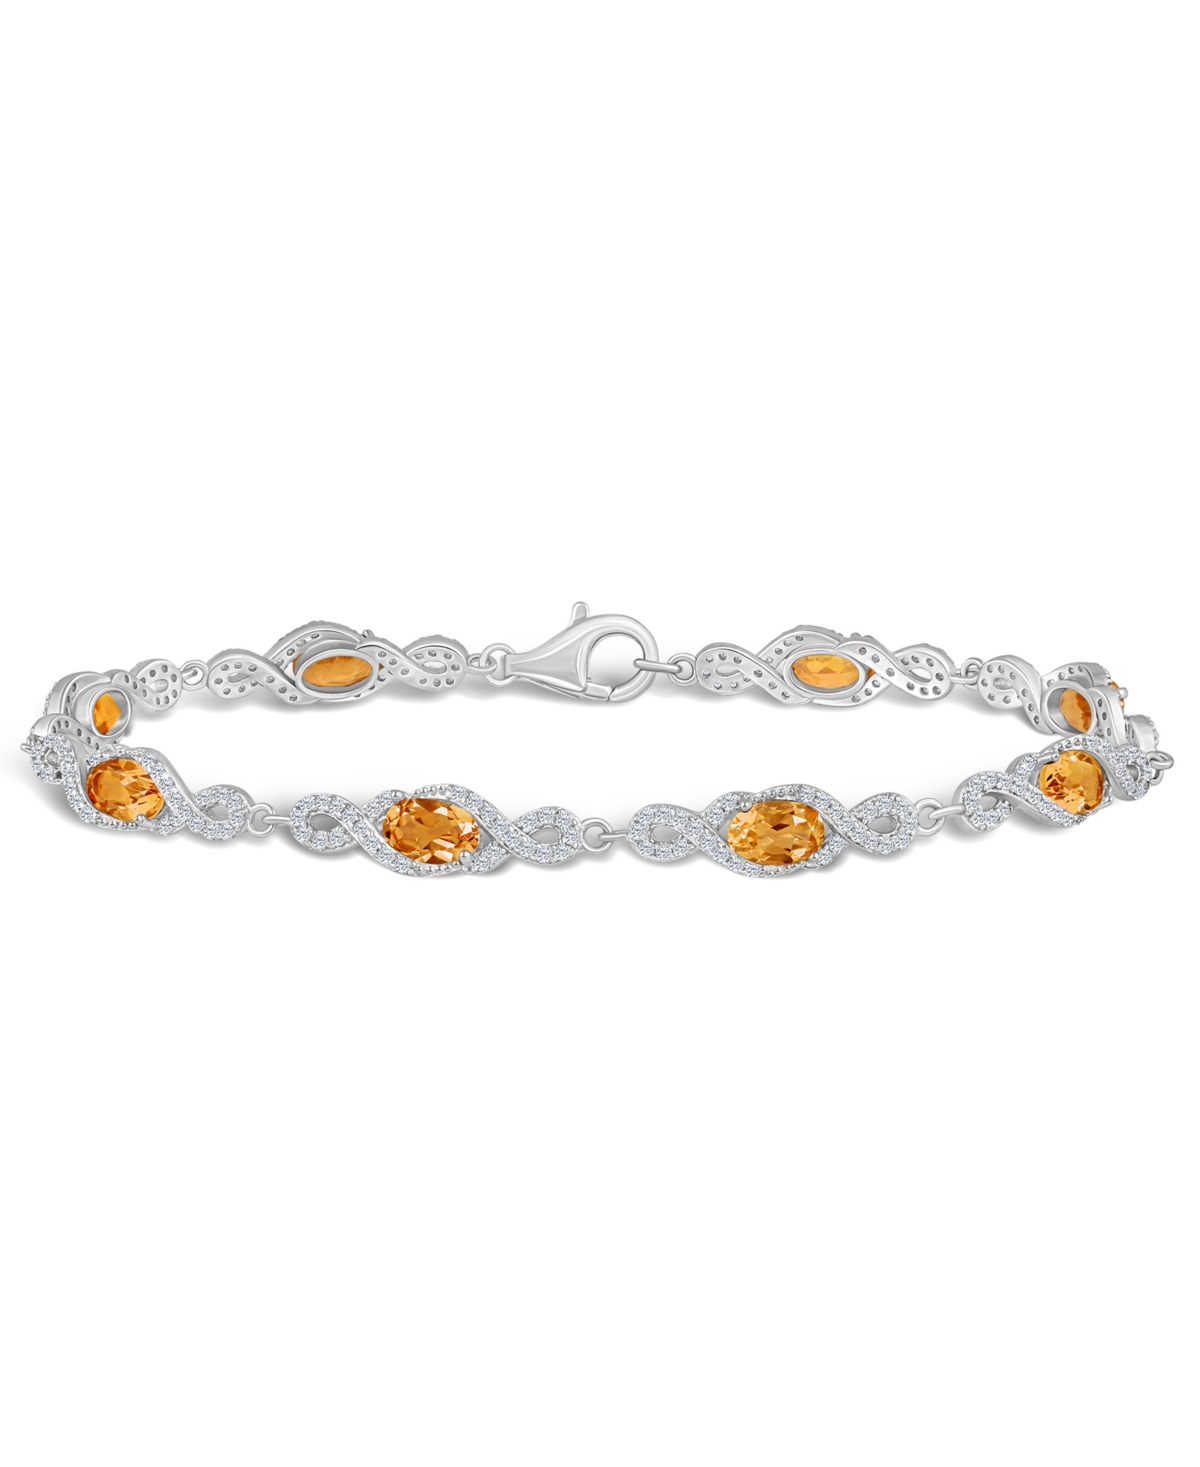 Macy's Citrine And White Topaz Bracelet (5-1/2 Ct. T.w And 5/8 Ct. T.w) In Sterling Silver